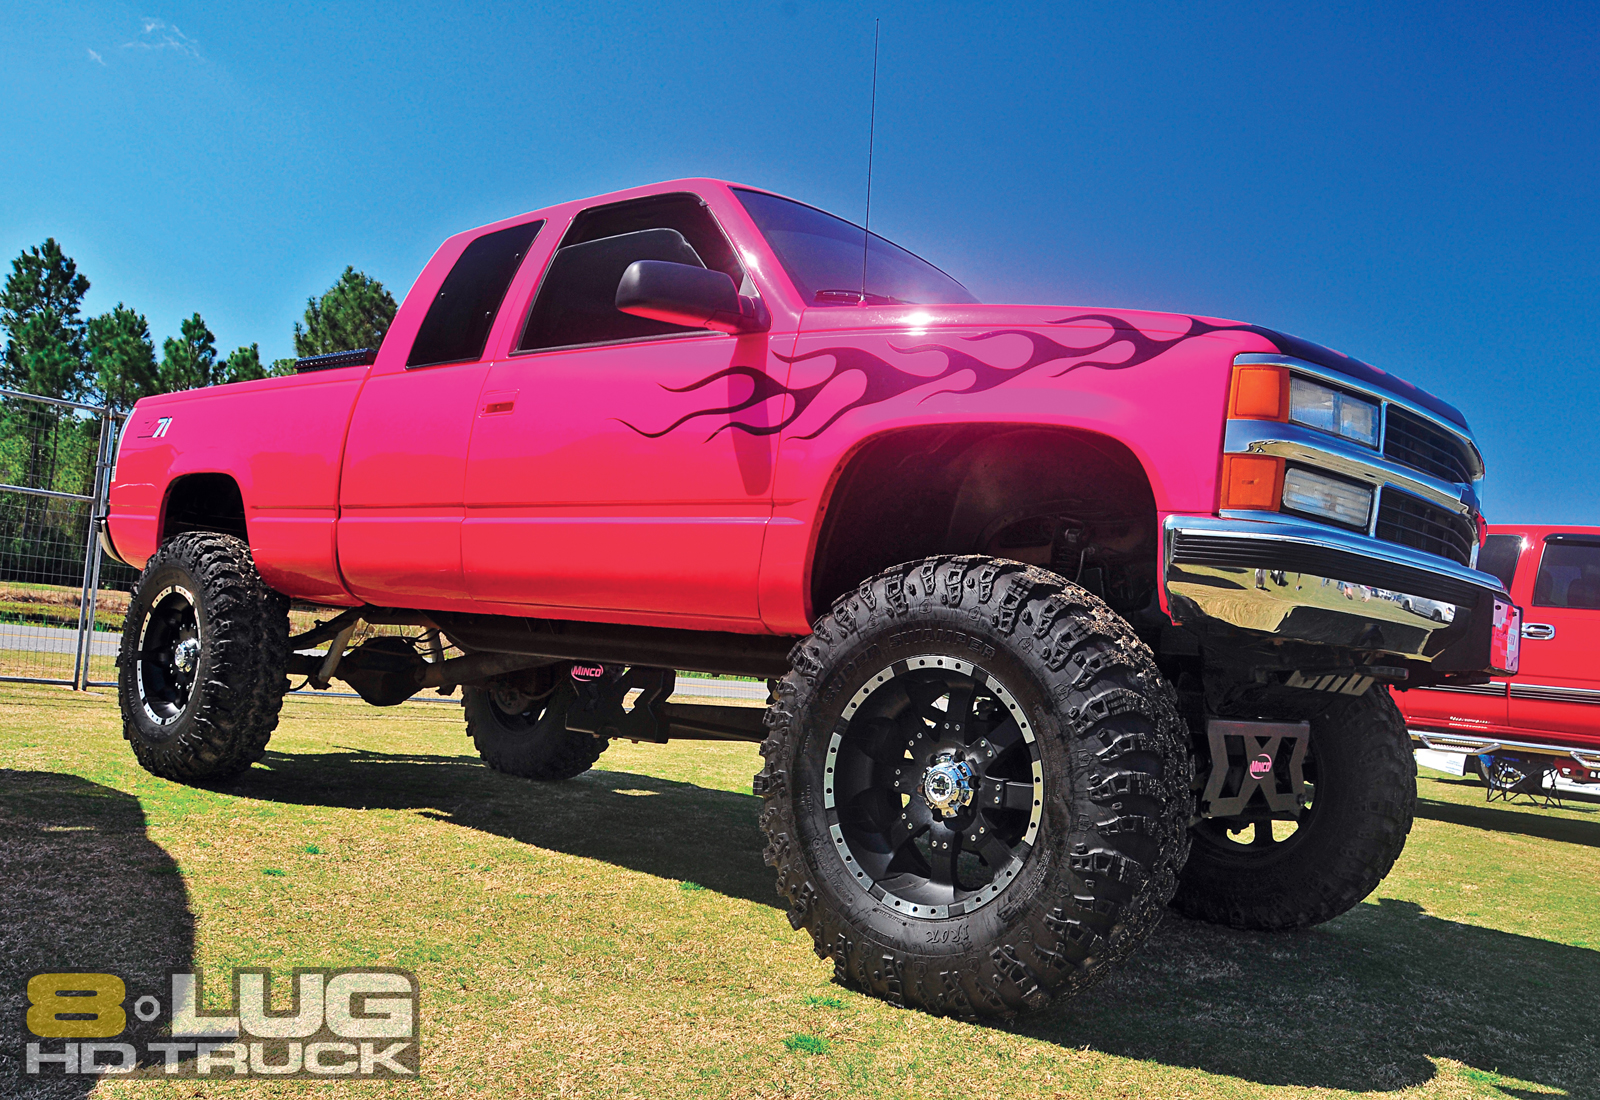 Lifted Chevy Trucks Pic2fly